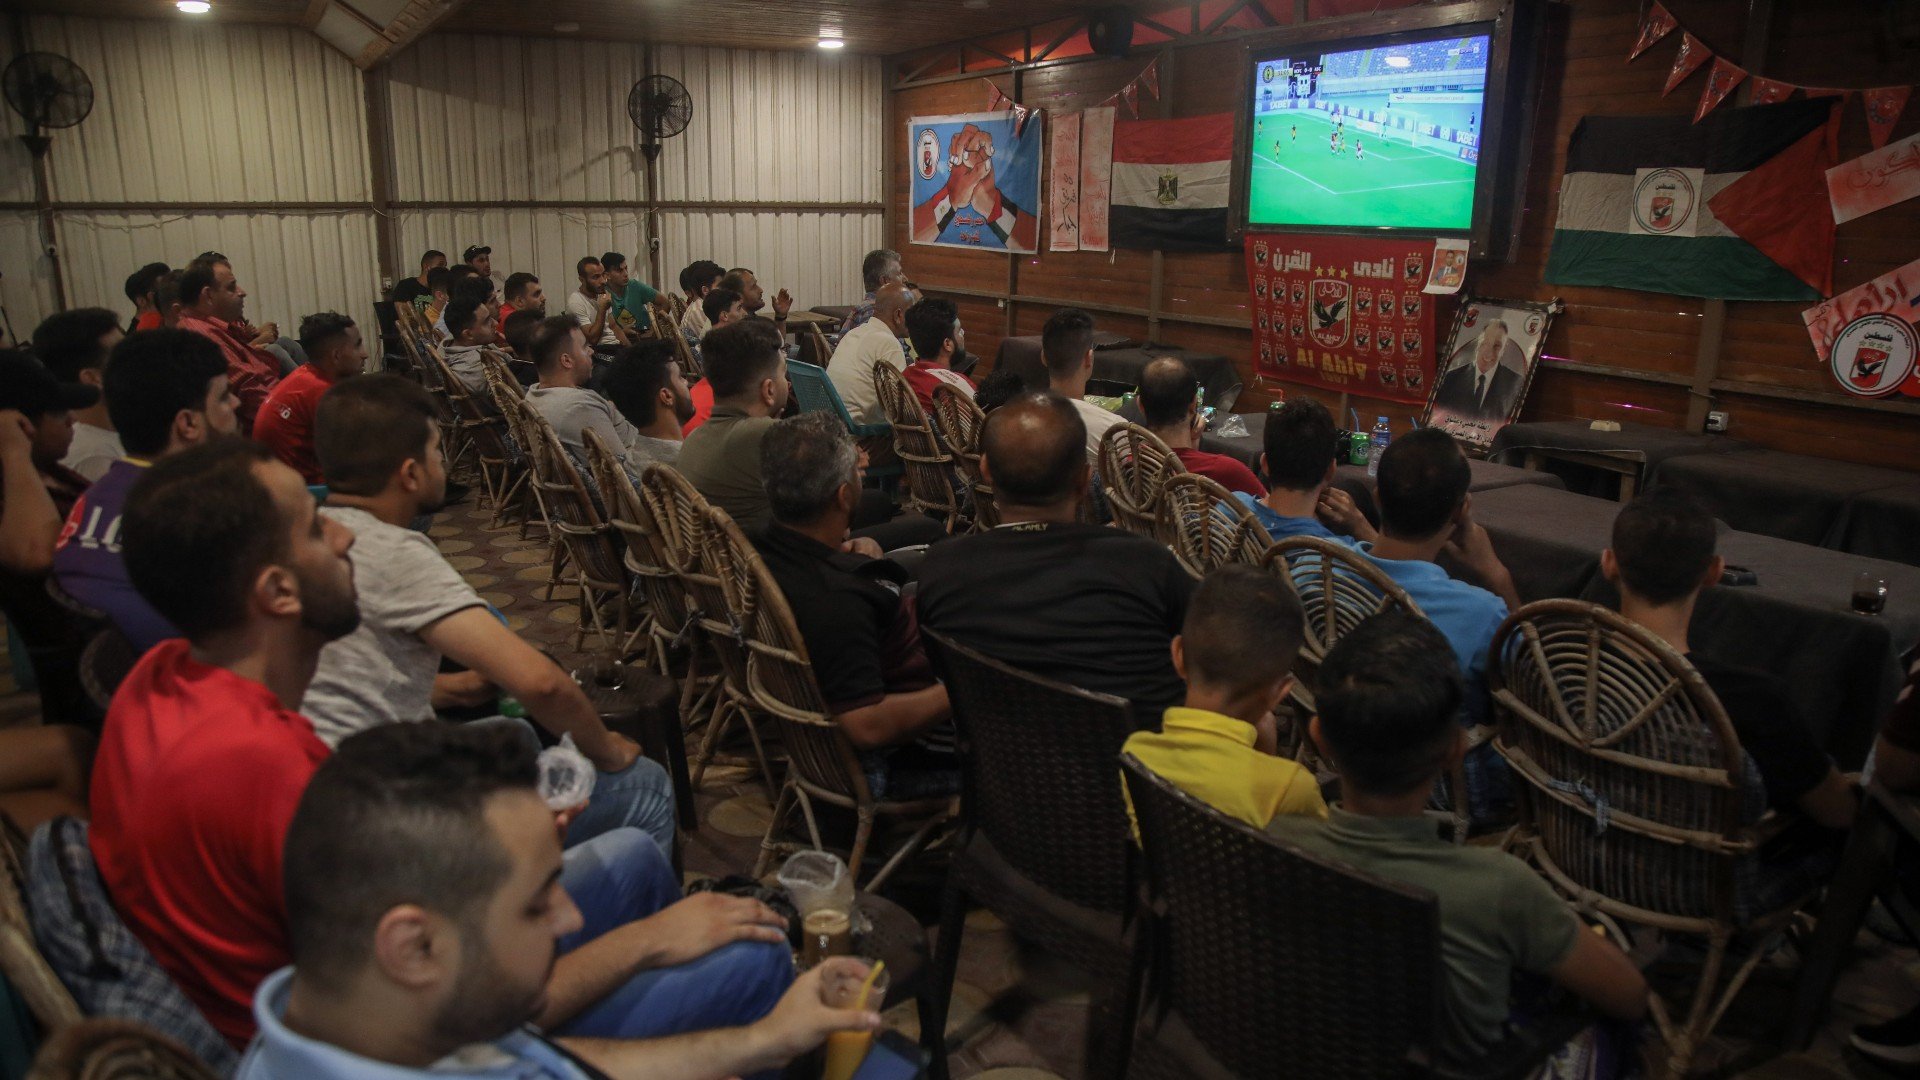 Palestinians watch a football match at a cafe in the besieged Gaza Strip (MEE/Muhammed Hajjar)